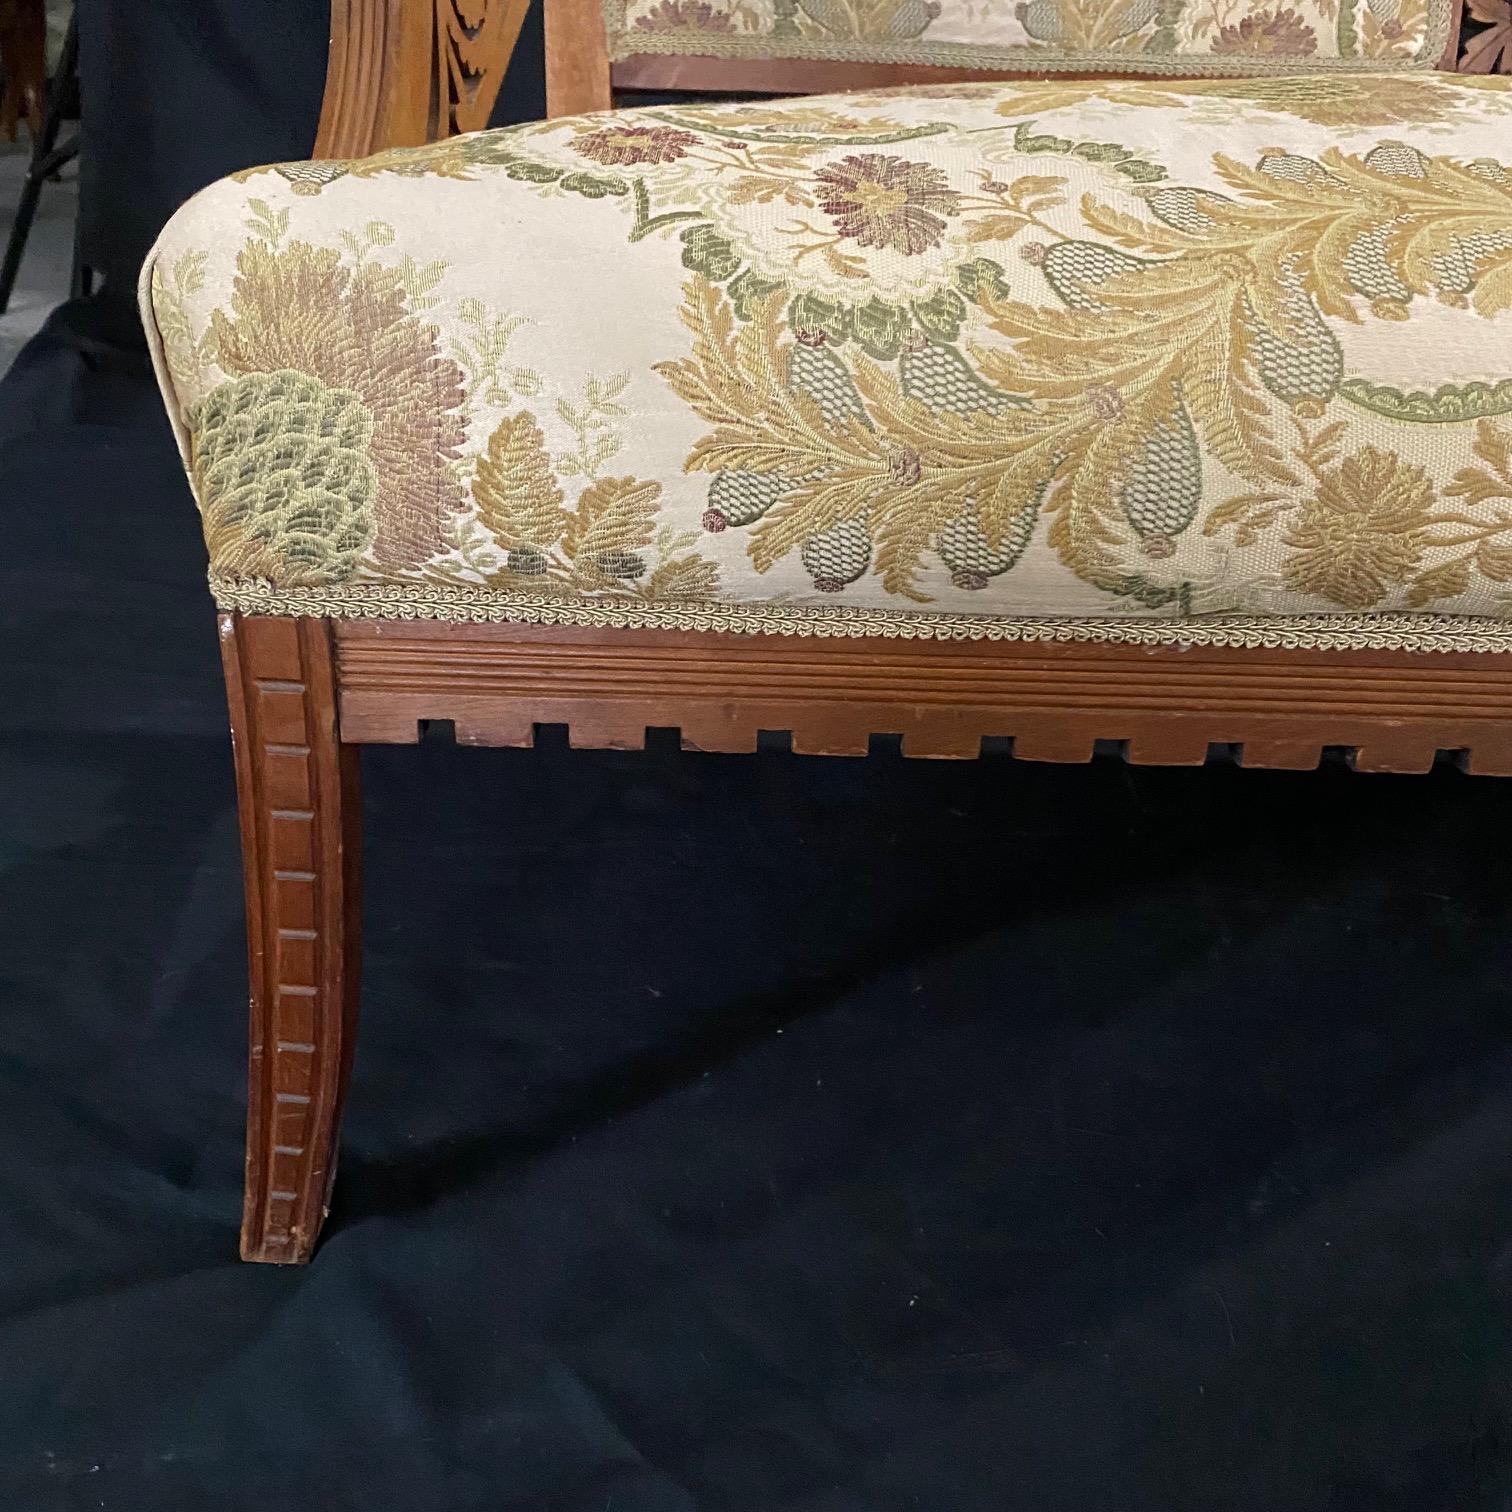 Authentic Rare Eastlake Aesthetic Movement Ornate Carved Walnut Loveseat For Sale 1